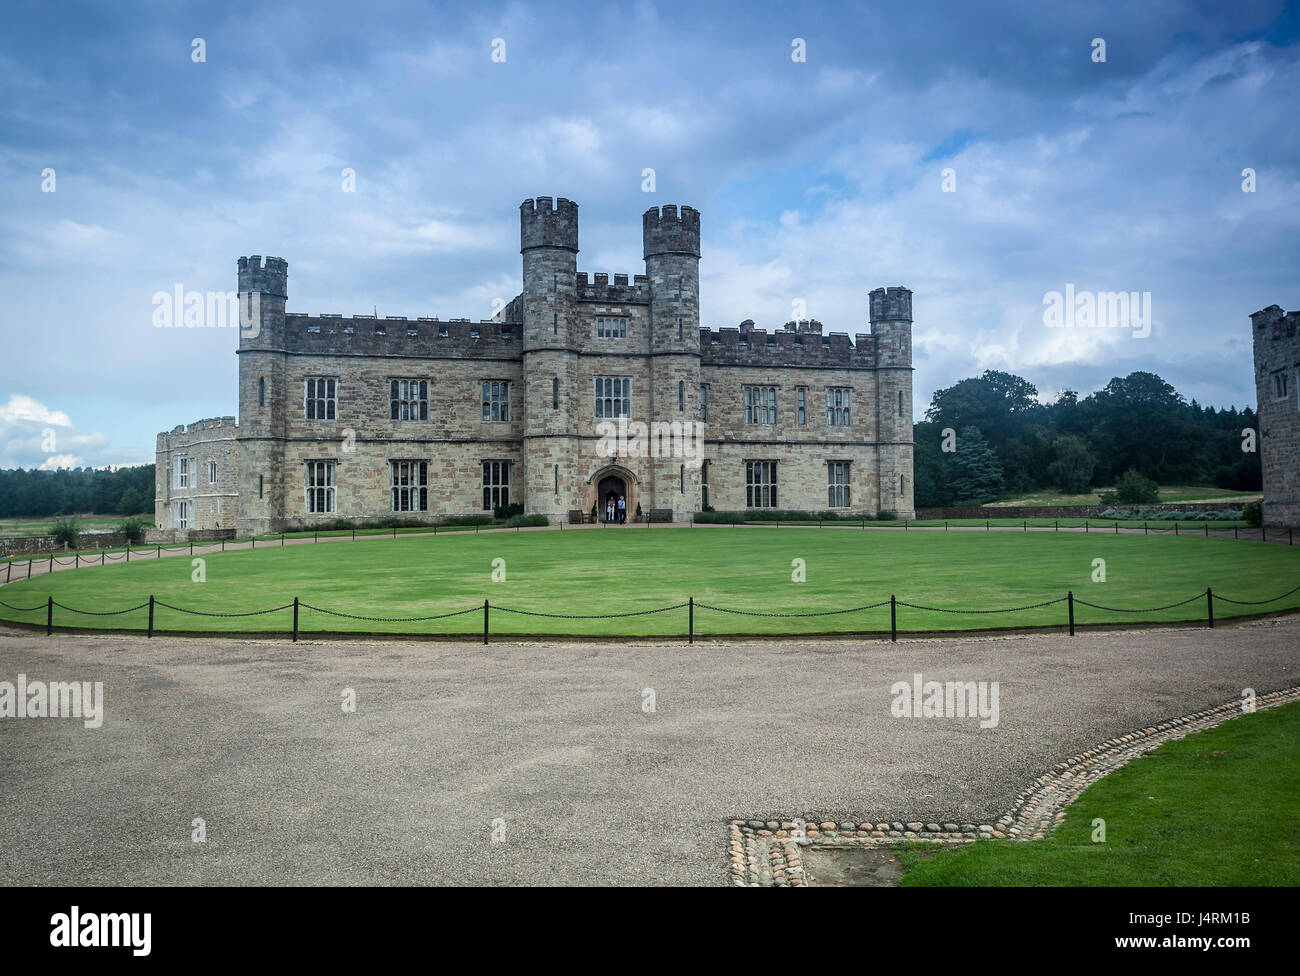 Leeds castle, situated in Kent, England Stock Photo